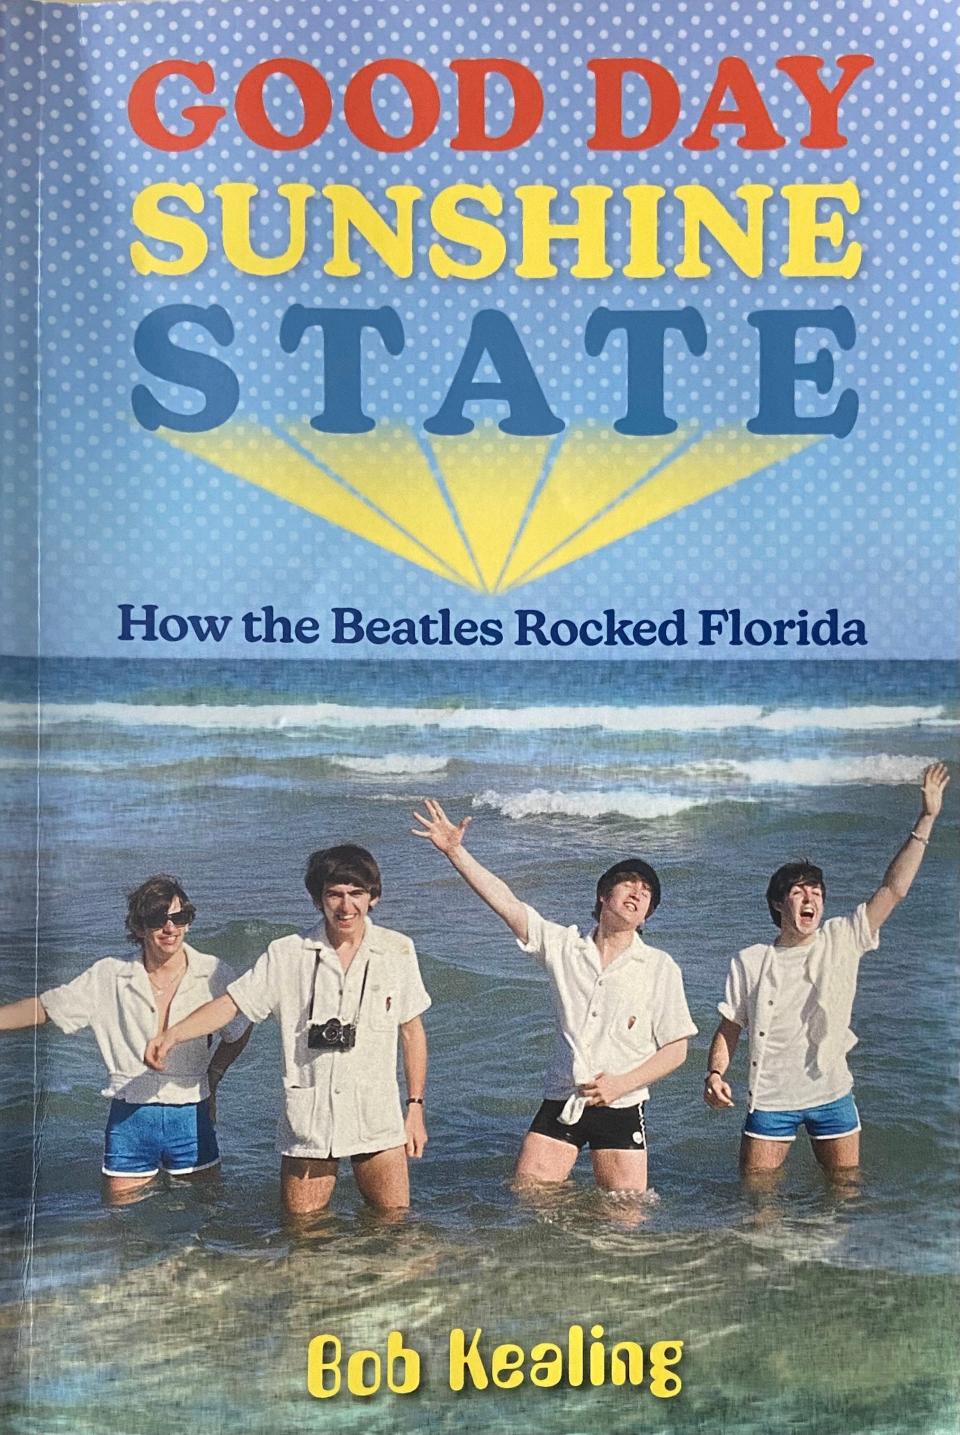 A new book tells the story of the Beatles and Florida in 1964.